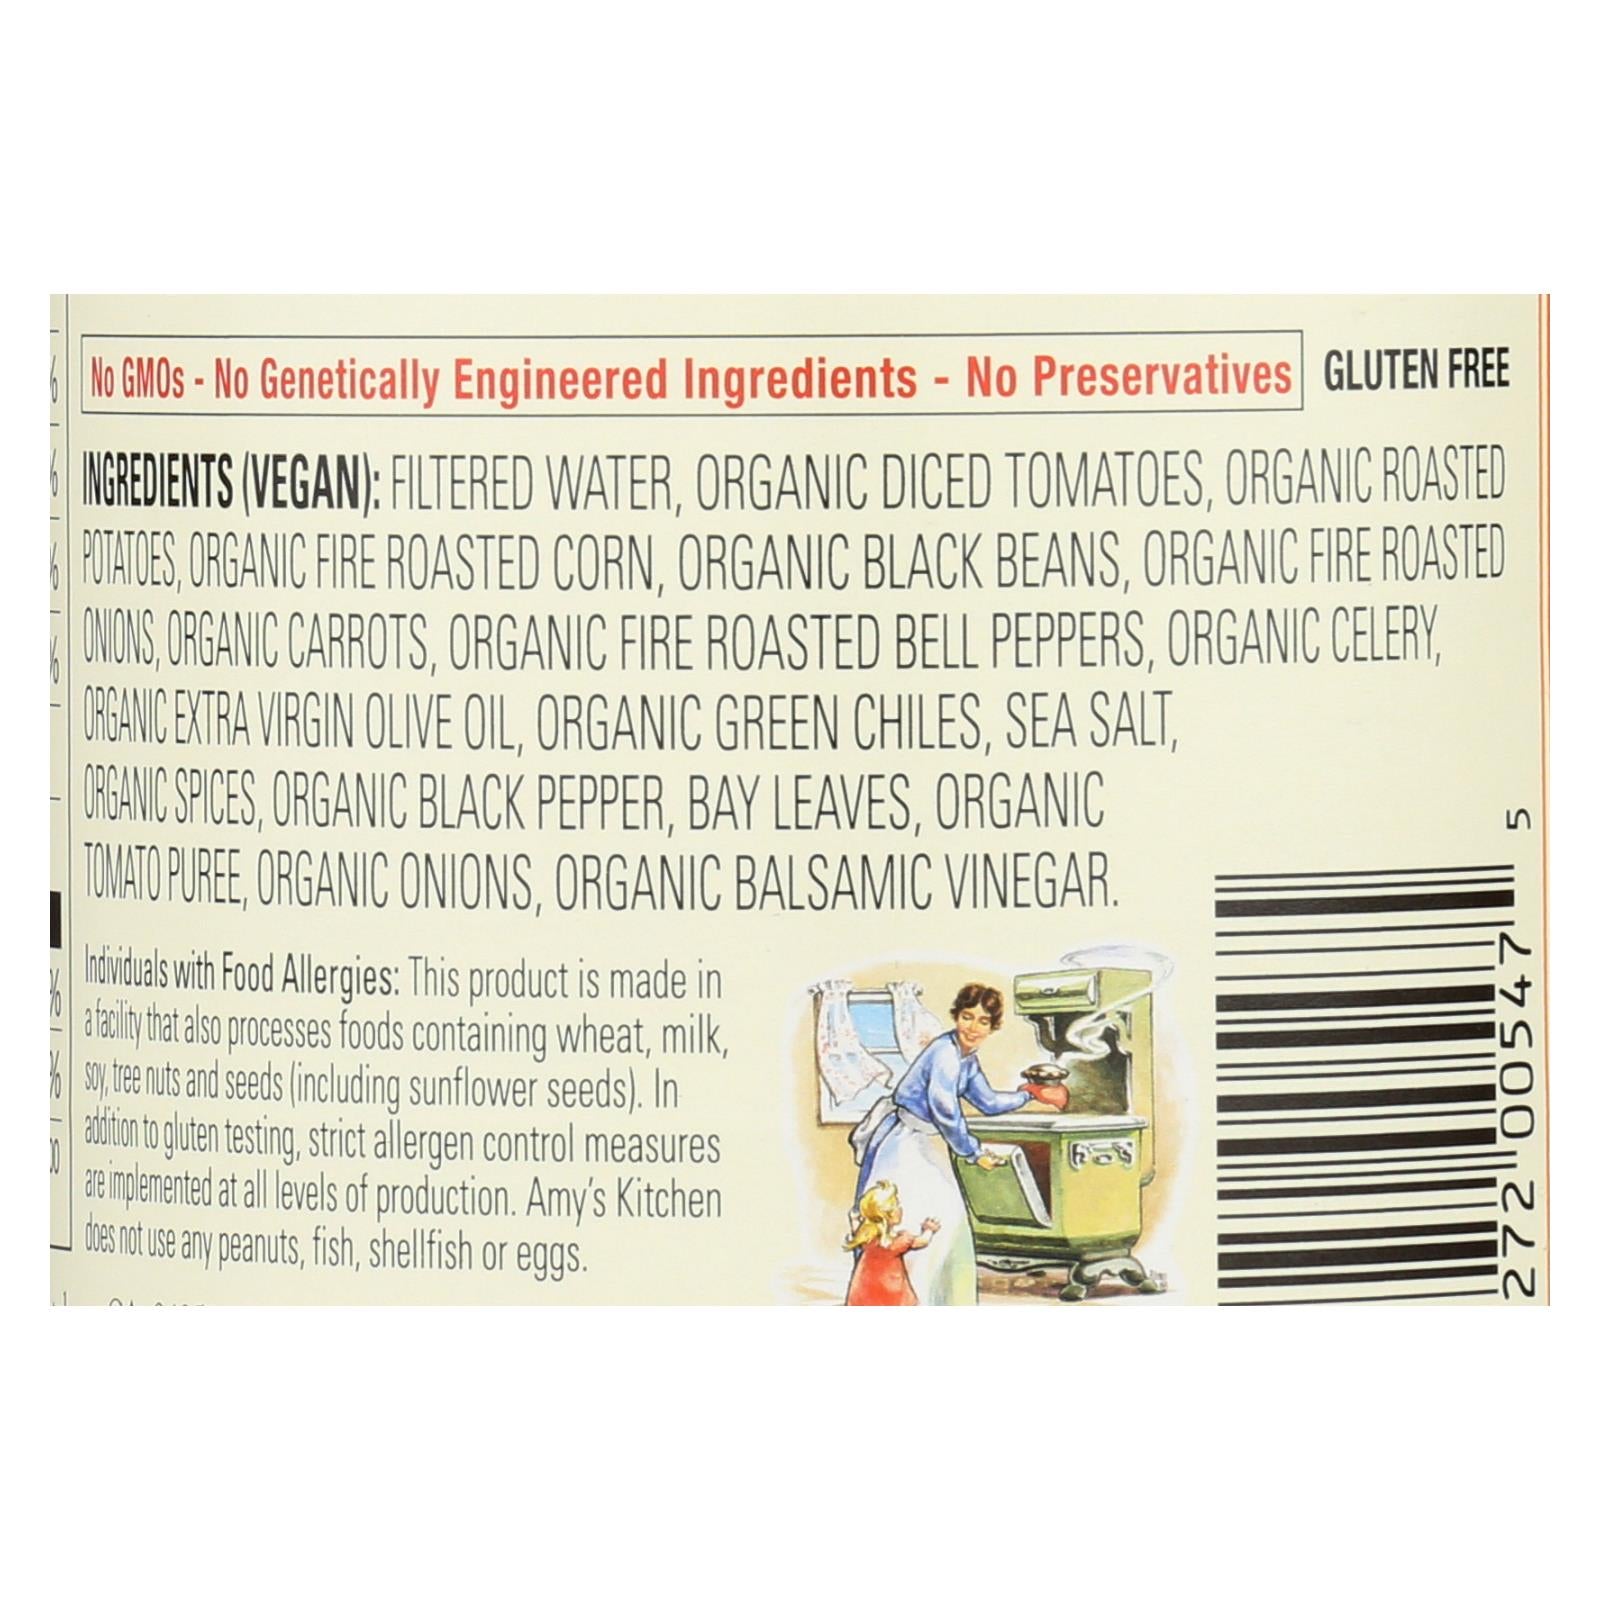 Amy S Organic Fire Roasted Southwestern Vegetable Soup, 14.3 Ounce, Pack of 12